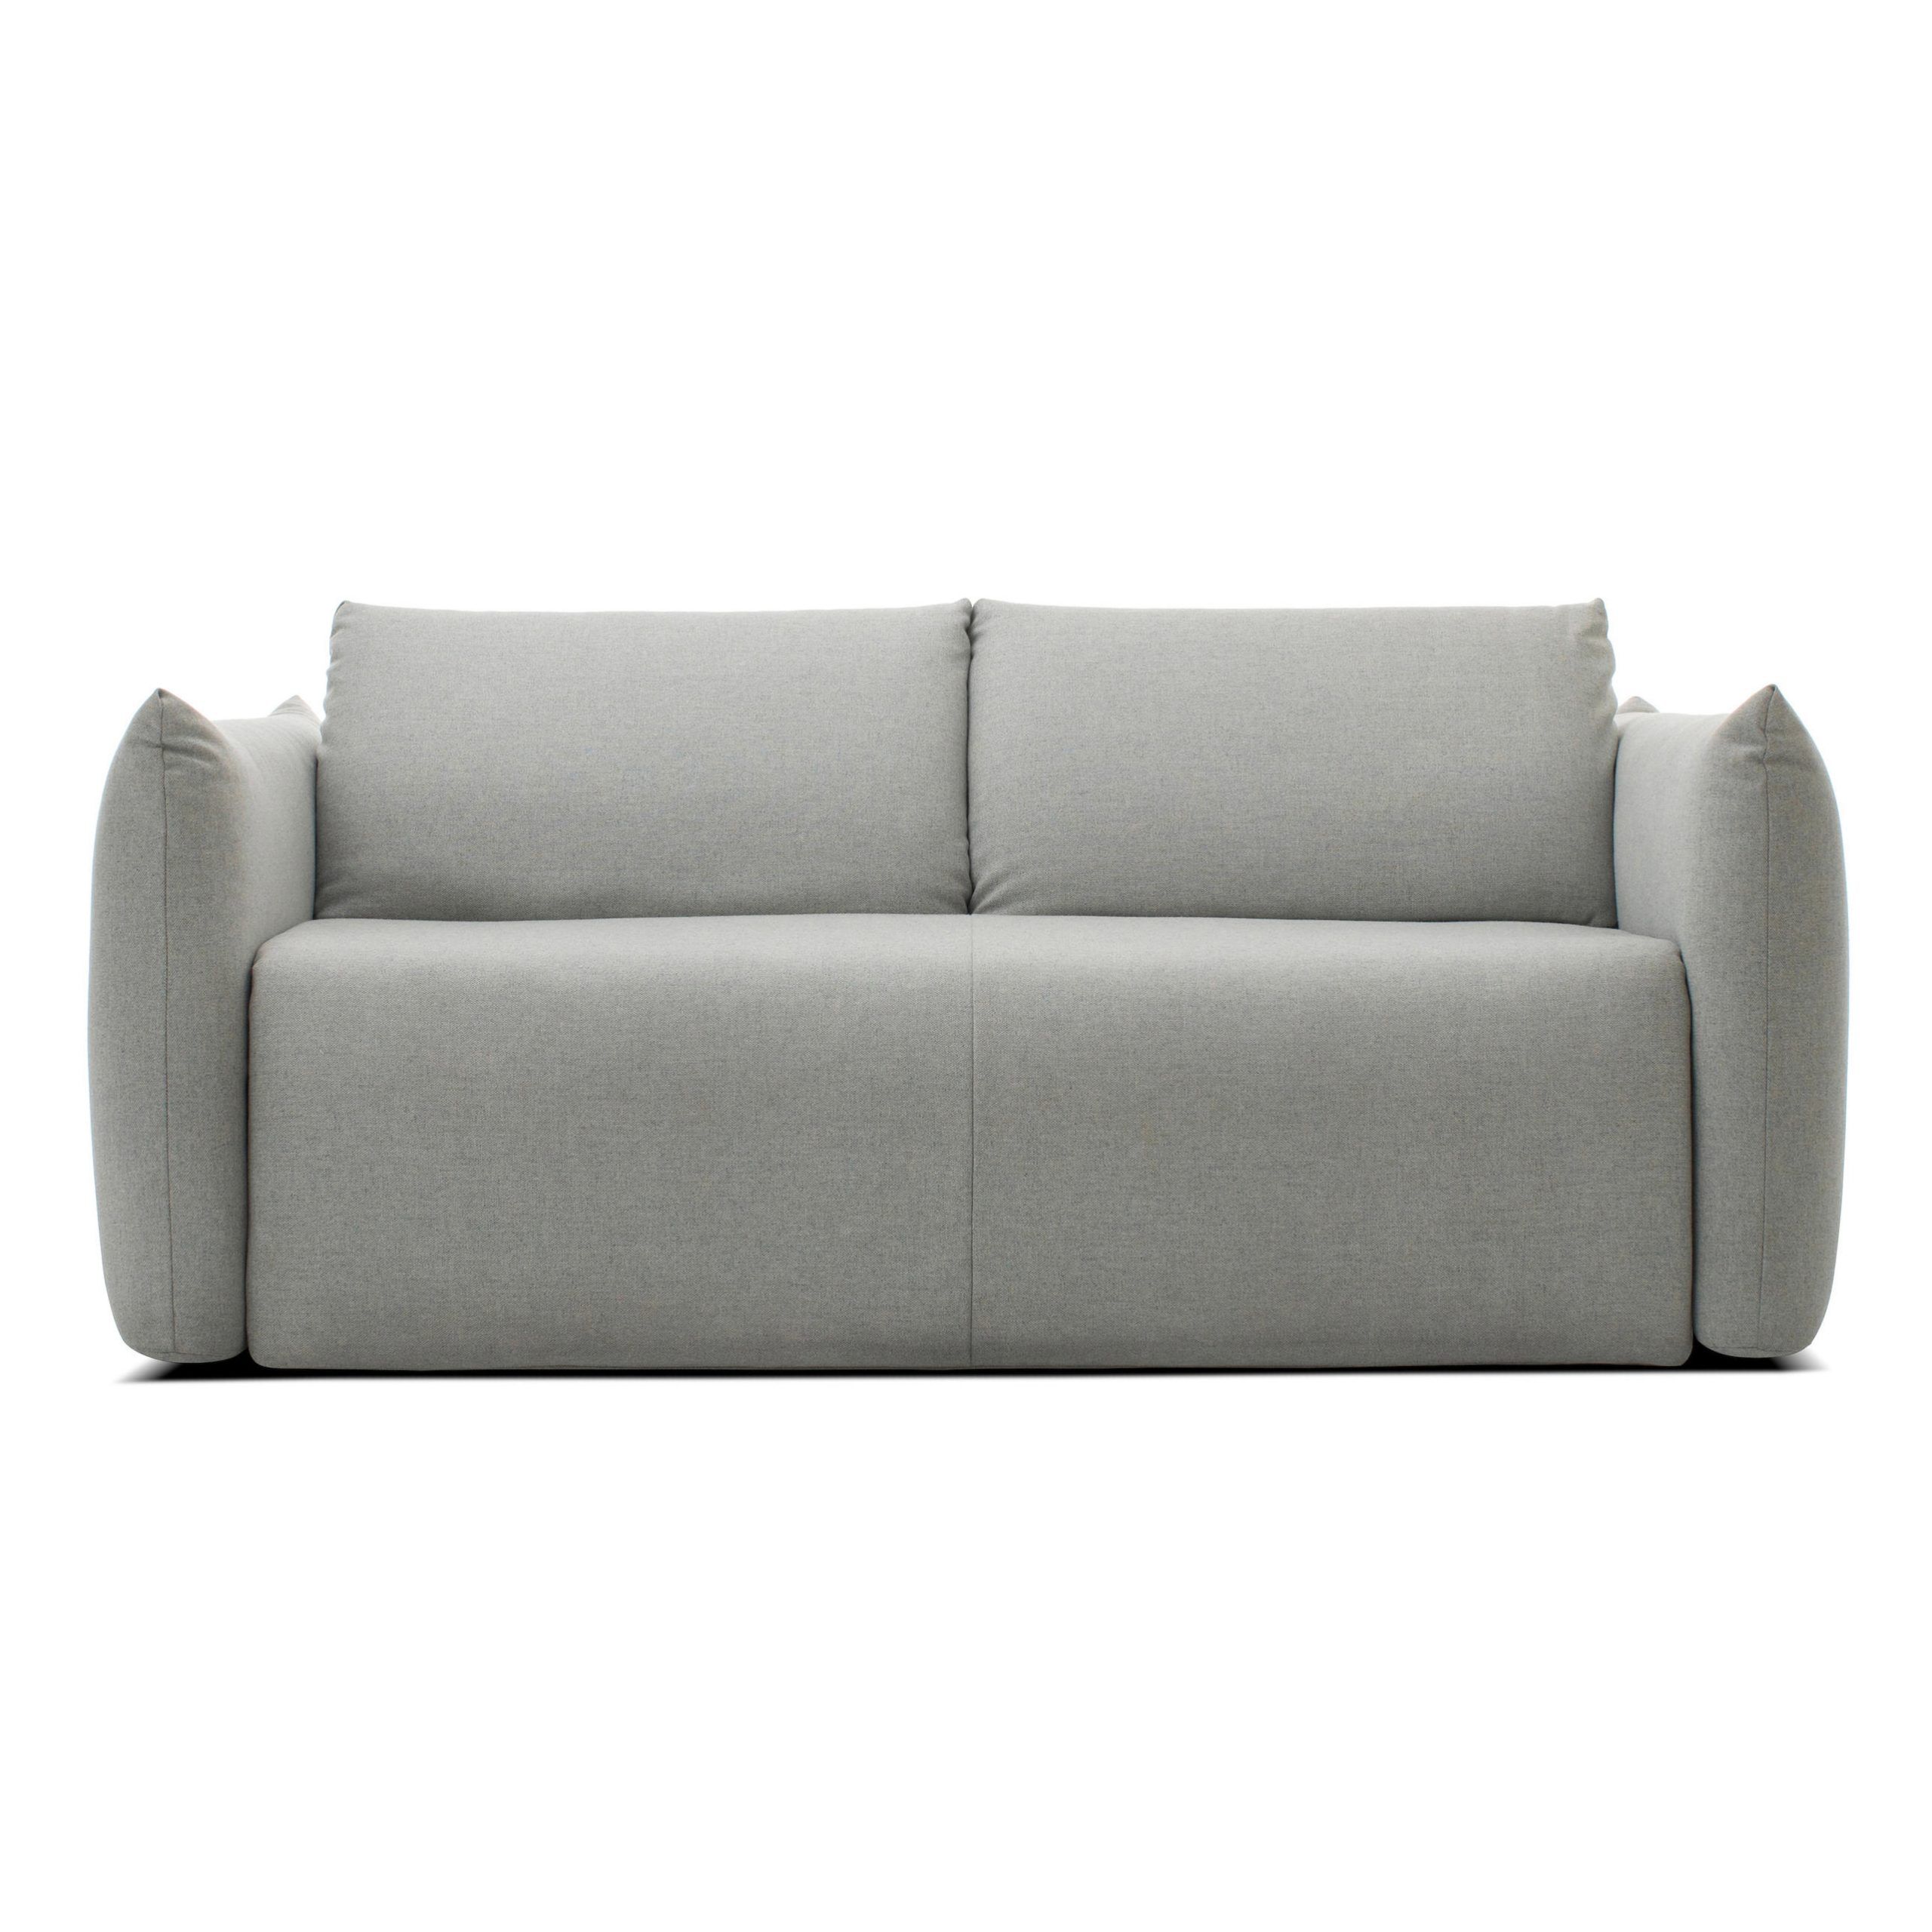 Luna Sofa Bed – Sofas From Extraform | Architonic Pertaining To Luna Leather Sectional Sofas (View 9 of 15)